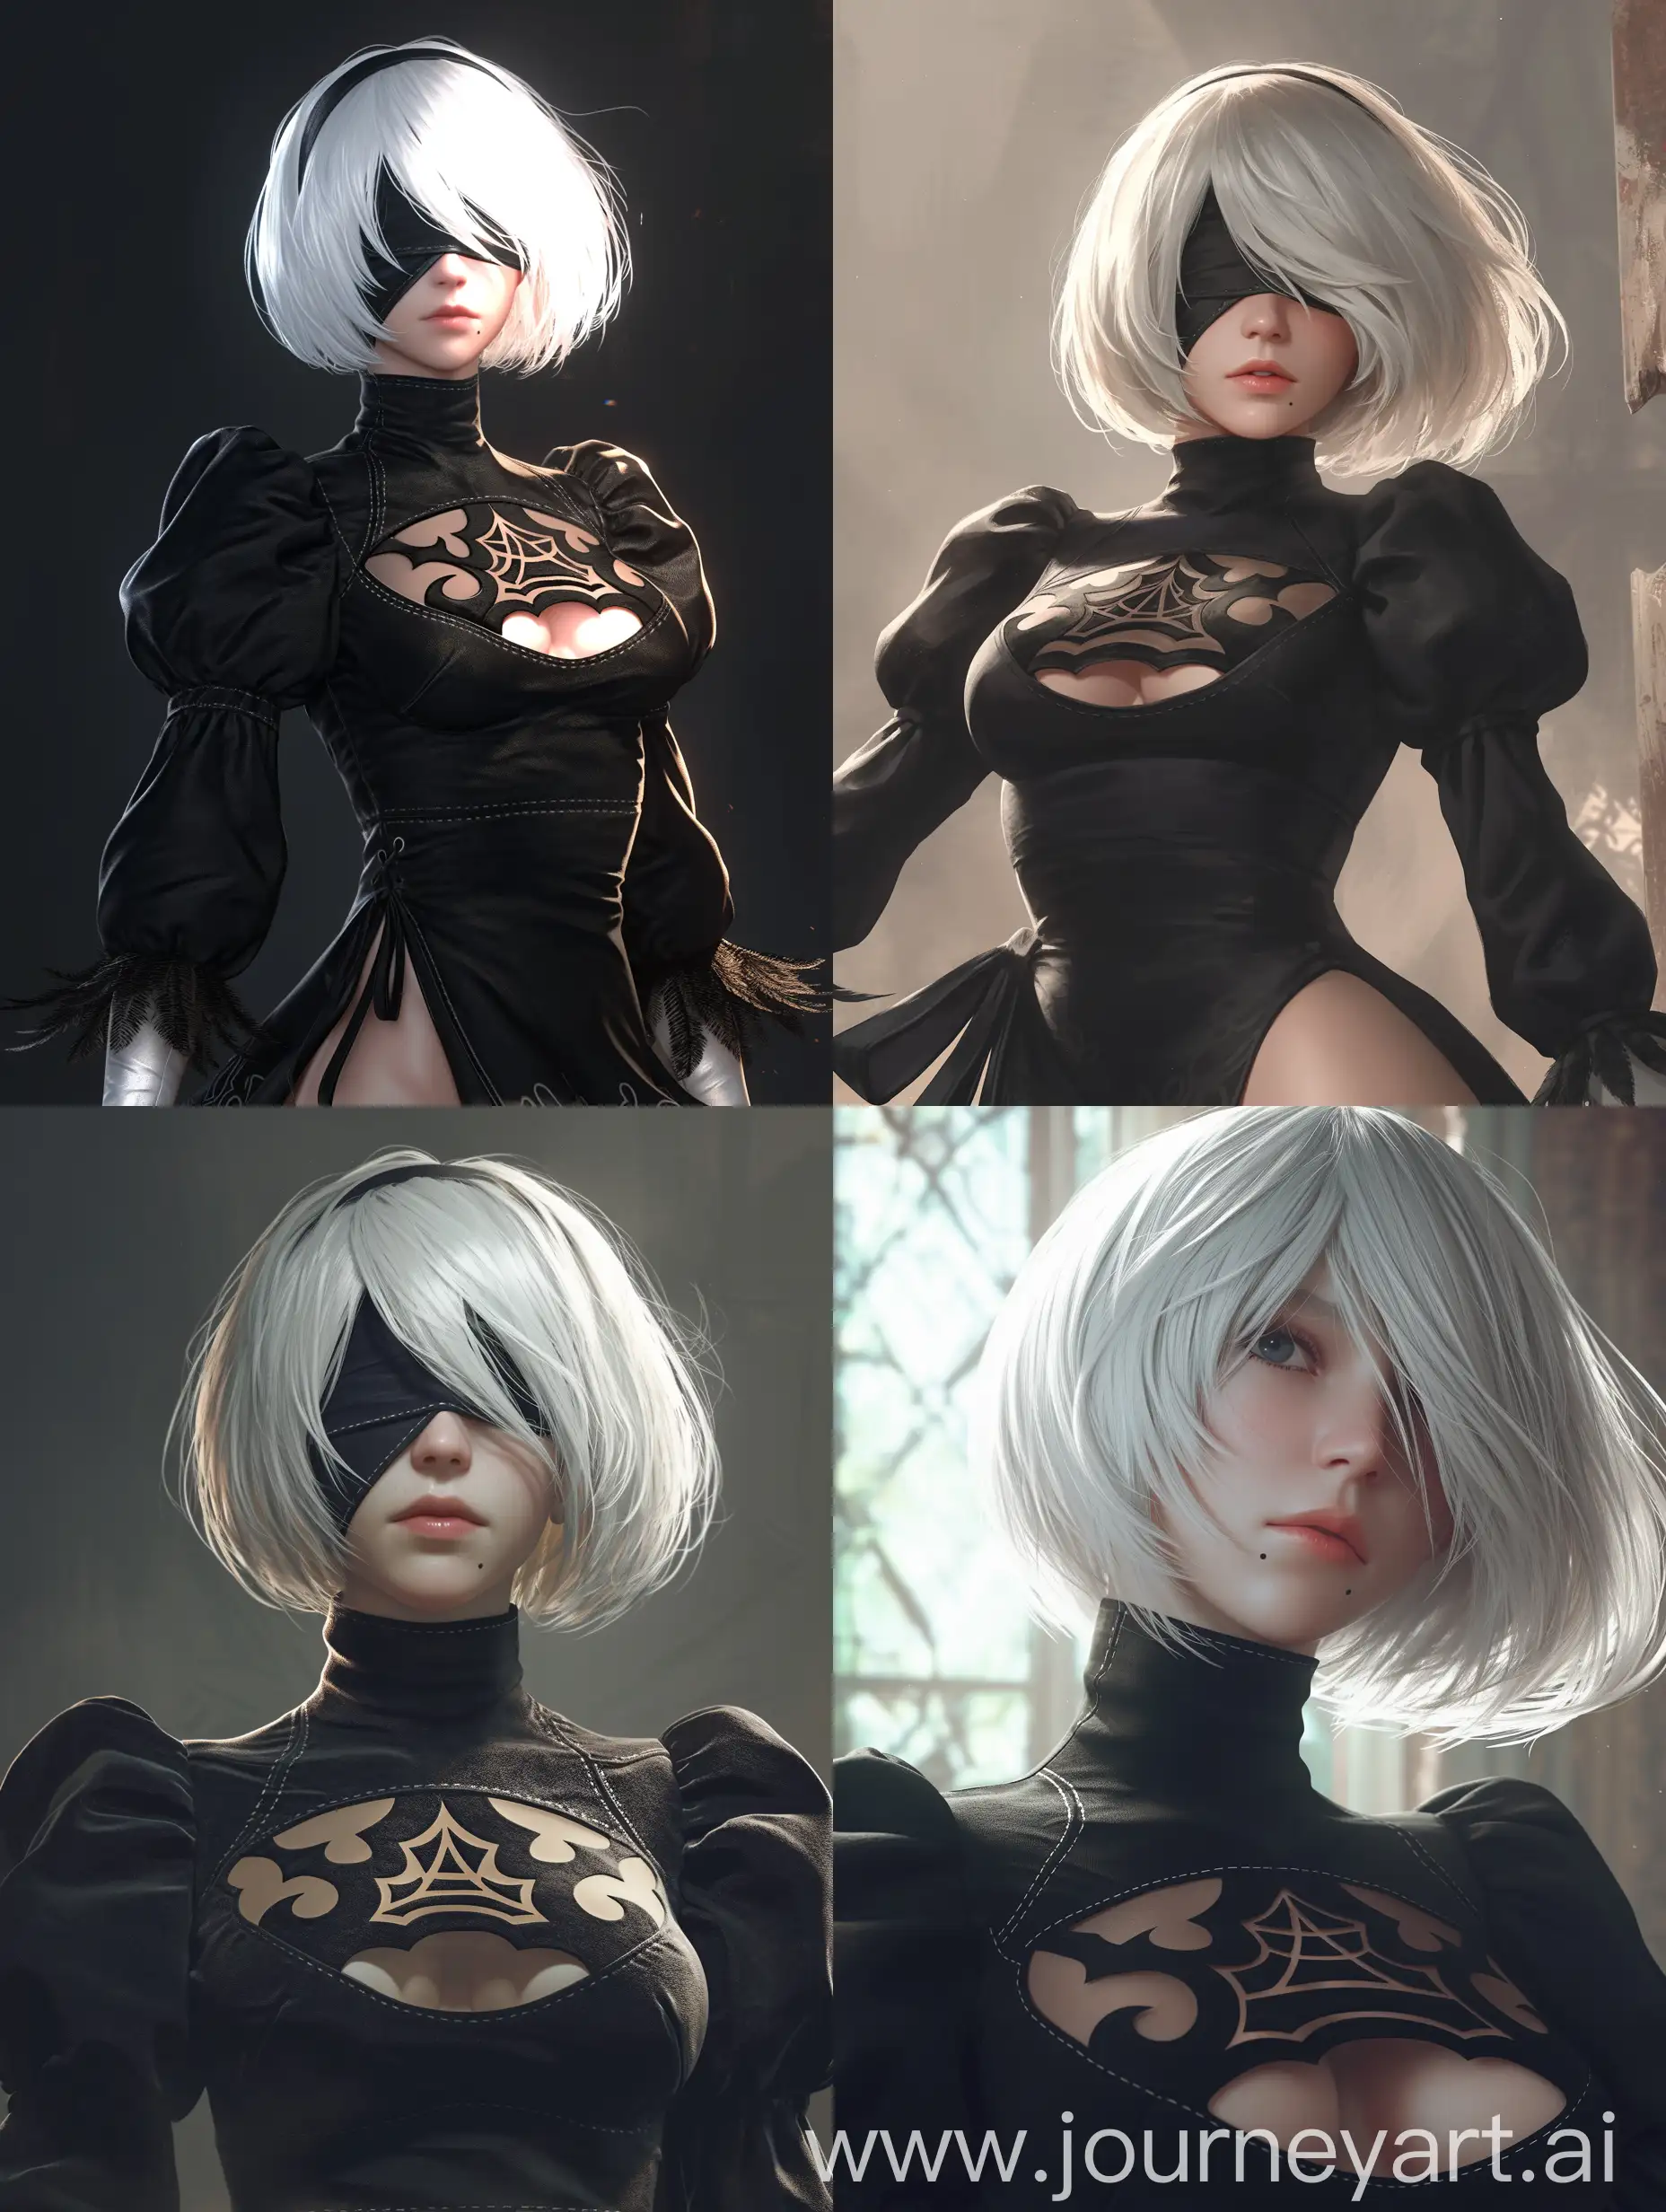 Ethereal-WhiteHaired-Woman-in-Black-Dress-Emulating-2B-from-Nier-Automata-in-Stunning-Composition